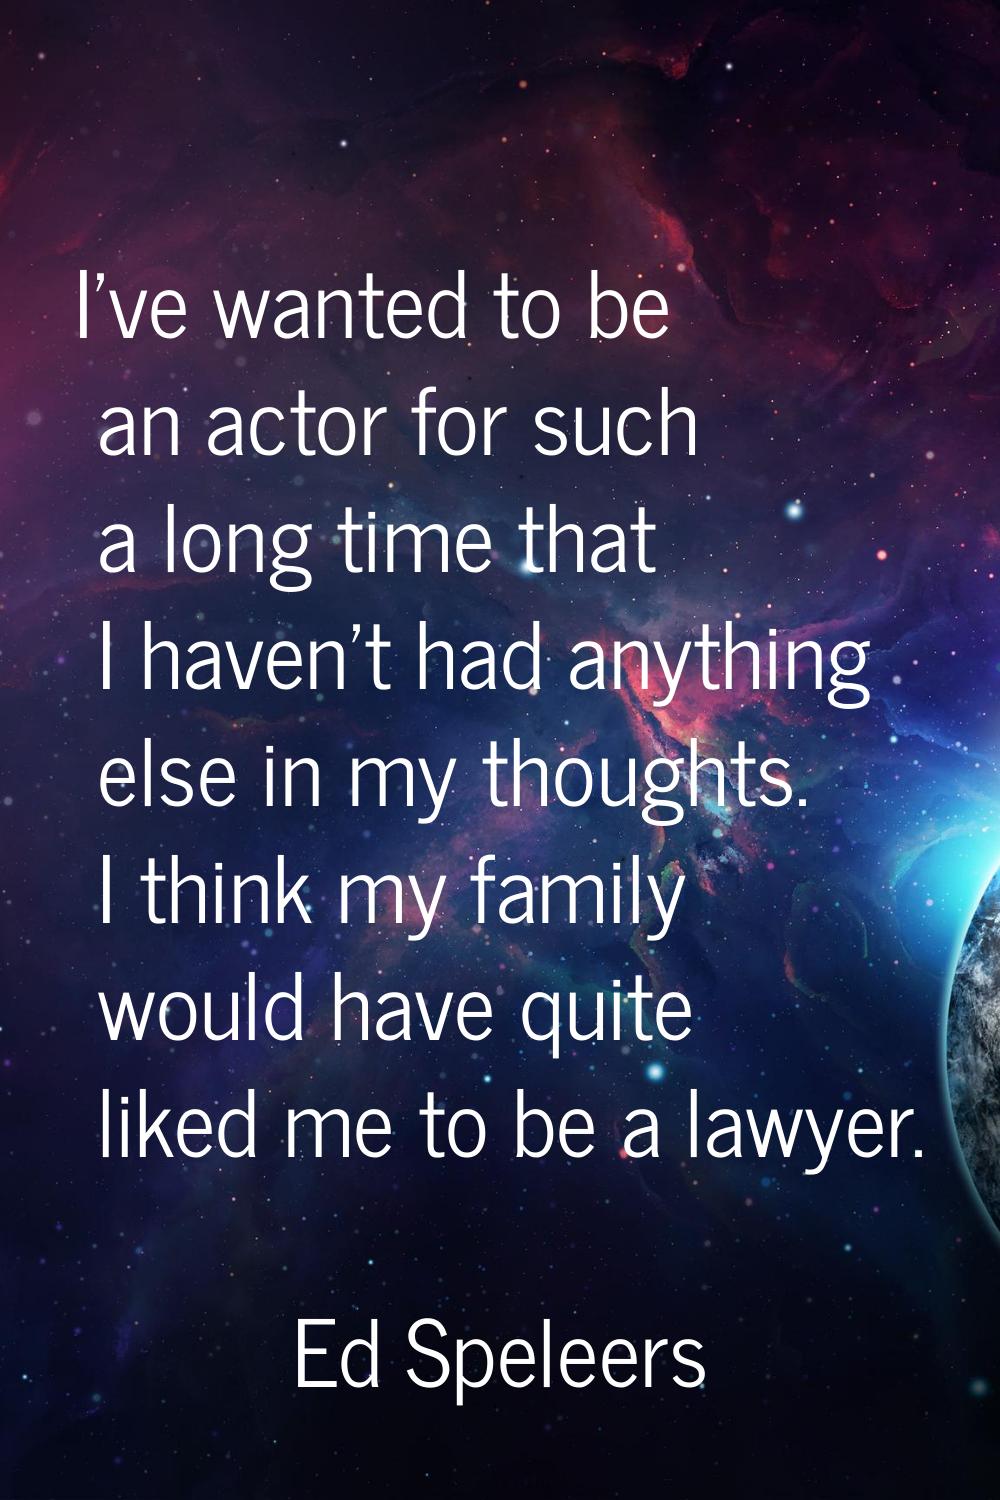 I've wanted to be an actor for such a long time that I haven't had anything else in my thoughts. I 